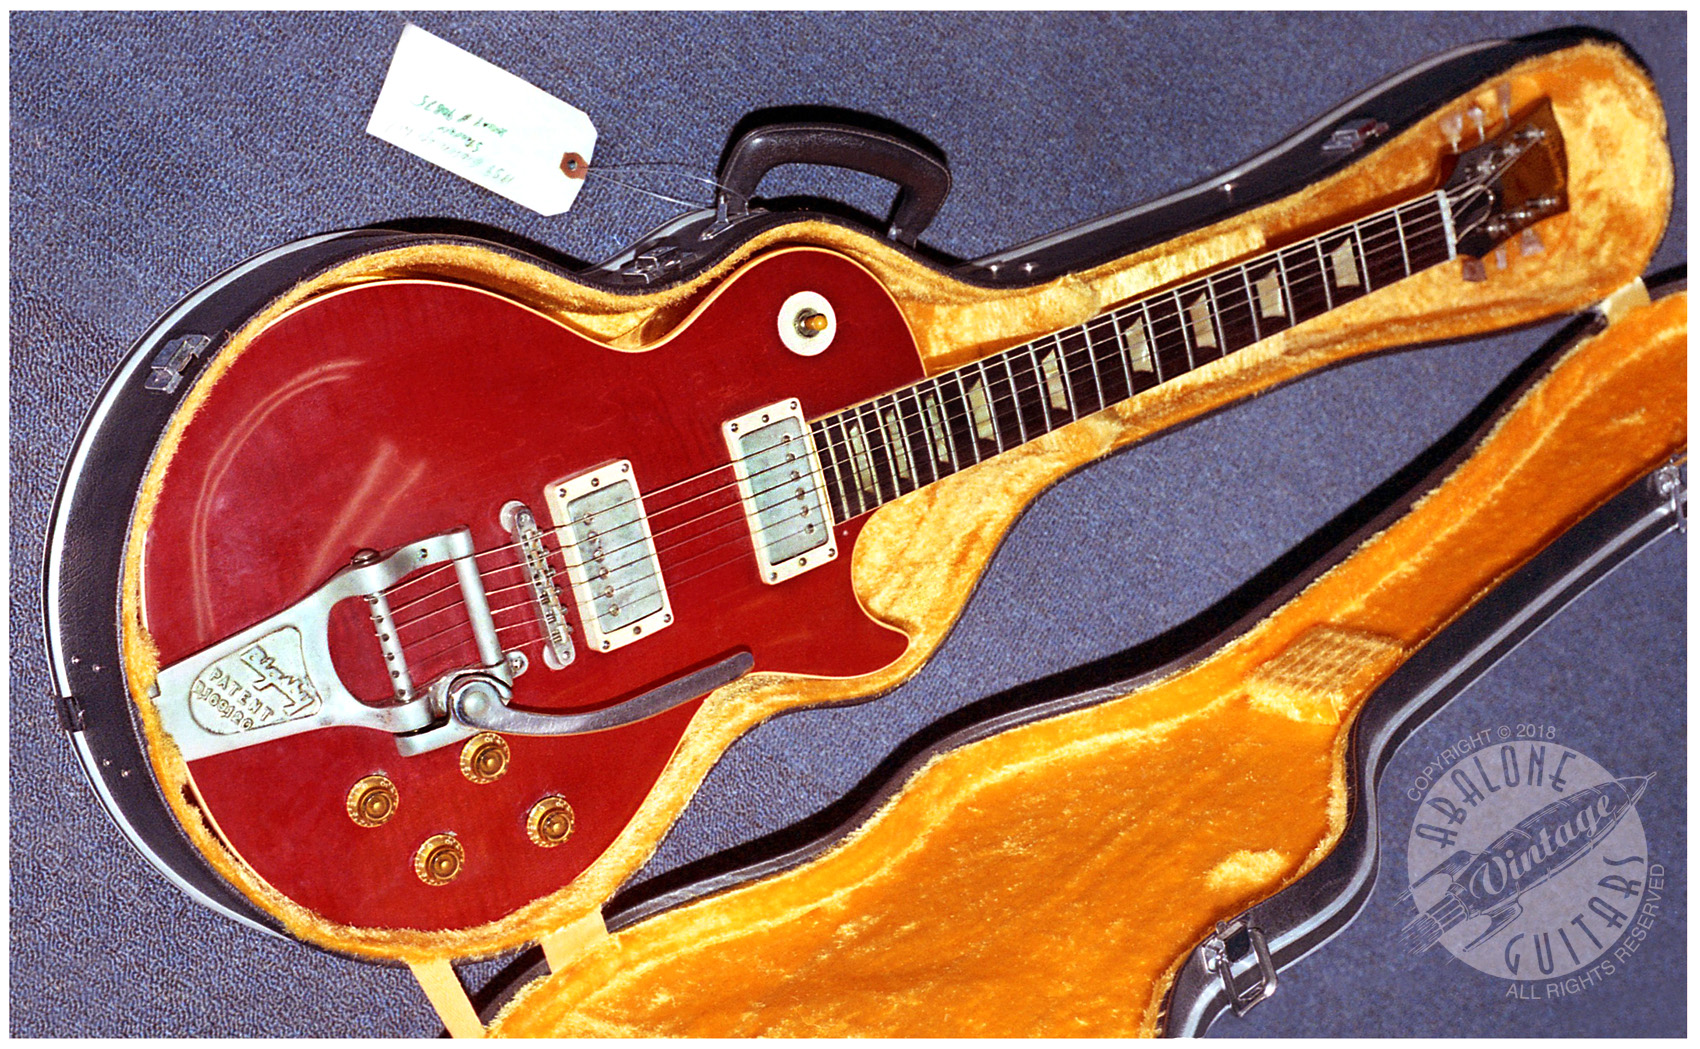 1959 Gibson Les Paul Standard Guitar in Cherry Red! 9 0875.